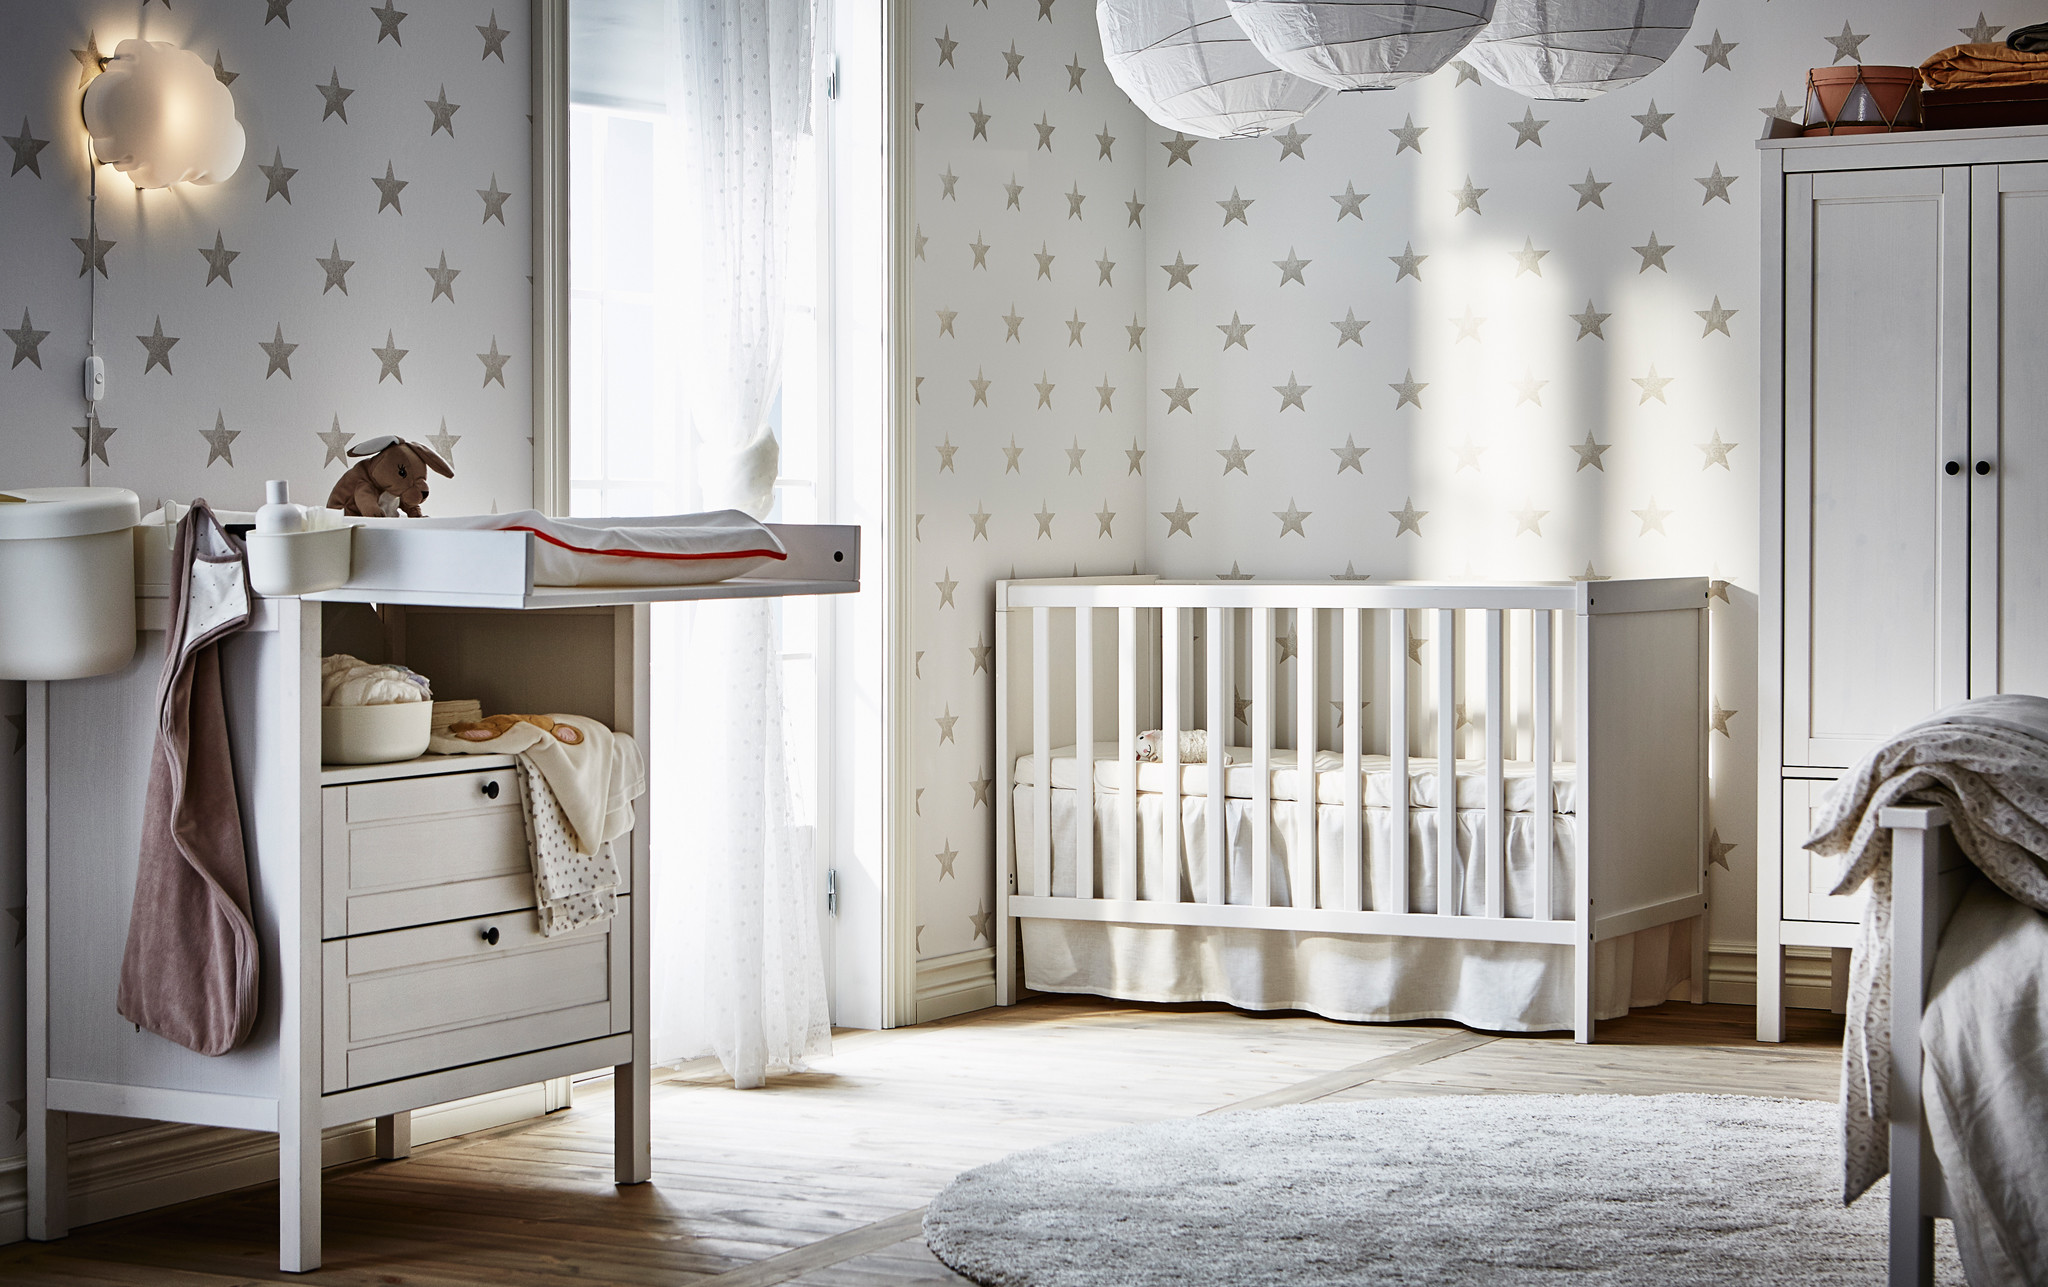 A changing table and cot in a grey and white nursery with star patterned wallpaper